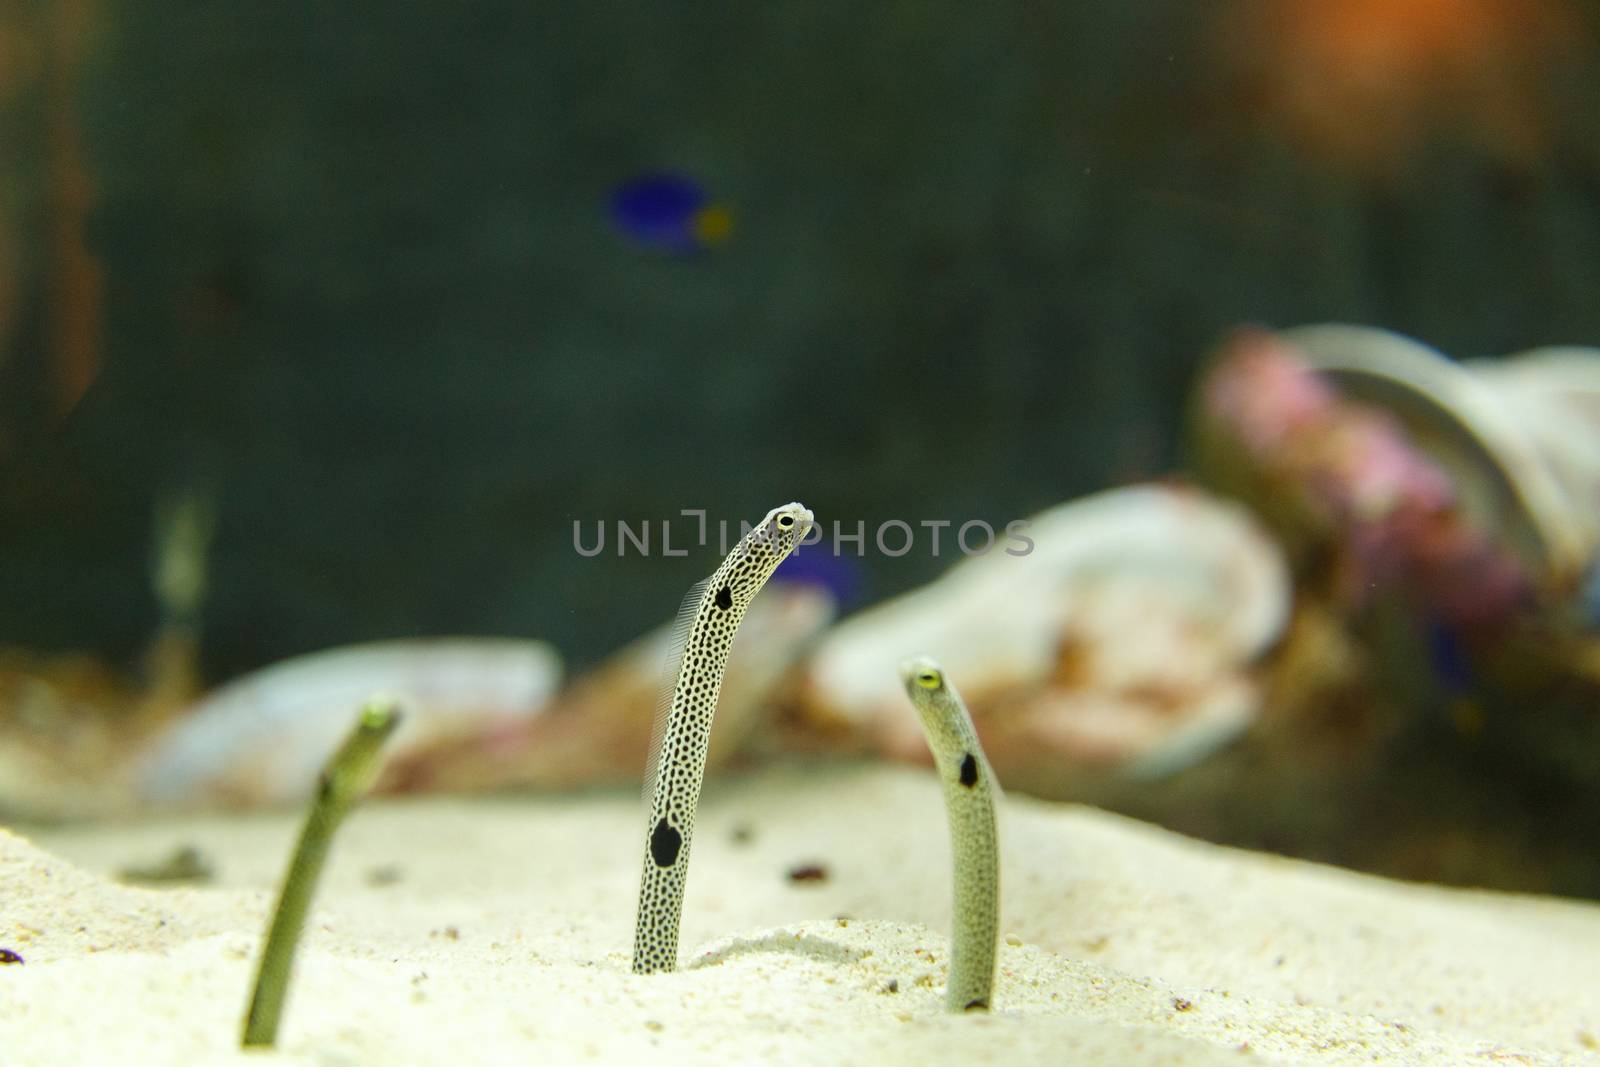 Spotted garden eel or Heteroconger hassi in aquarium in Dubai, UAE. They are showing their face from sand.